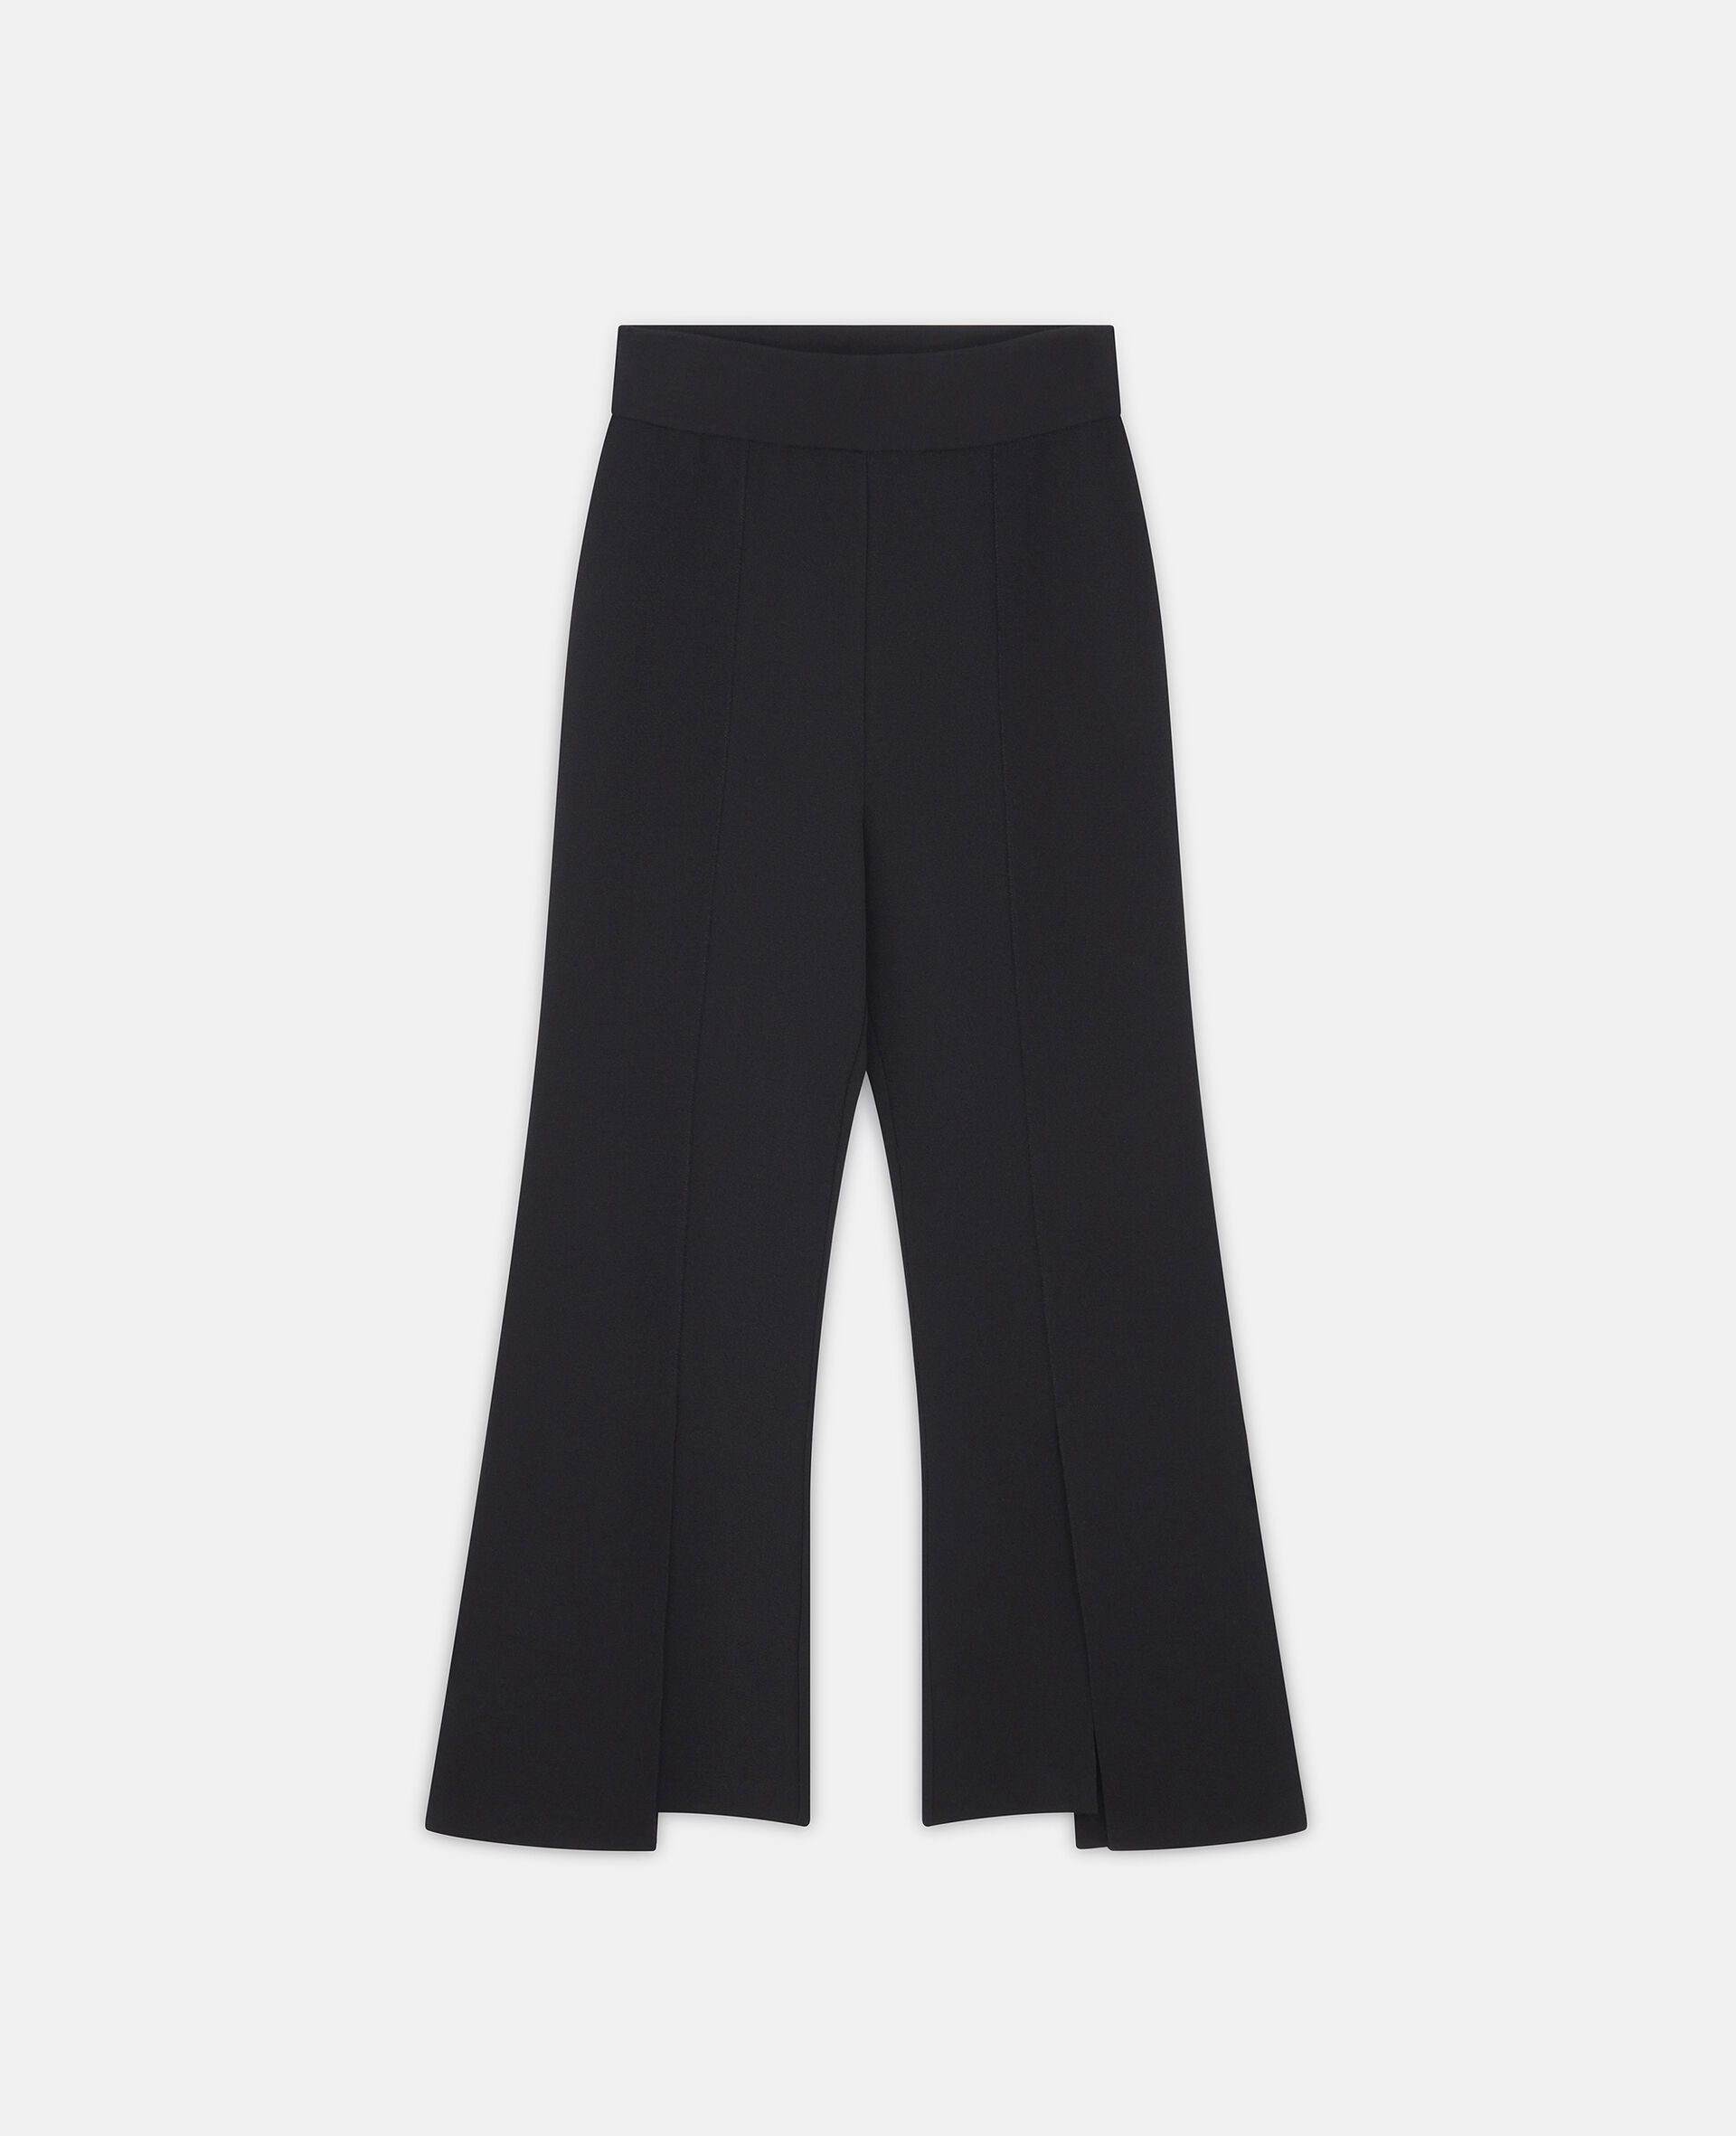 Compact Knit Trousers-Black-large